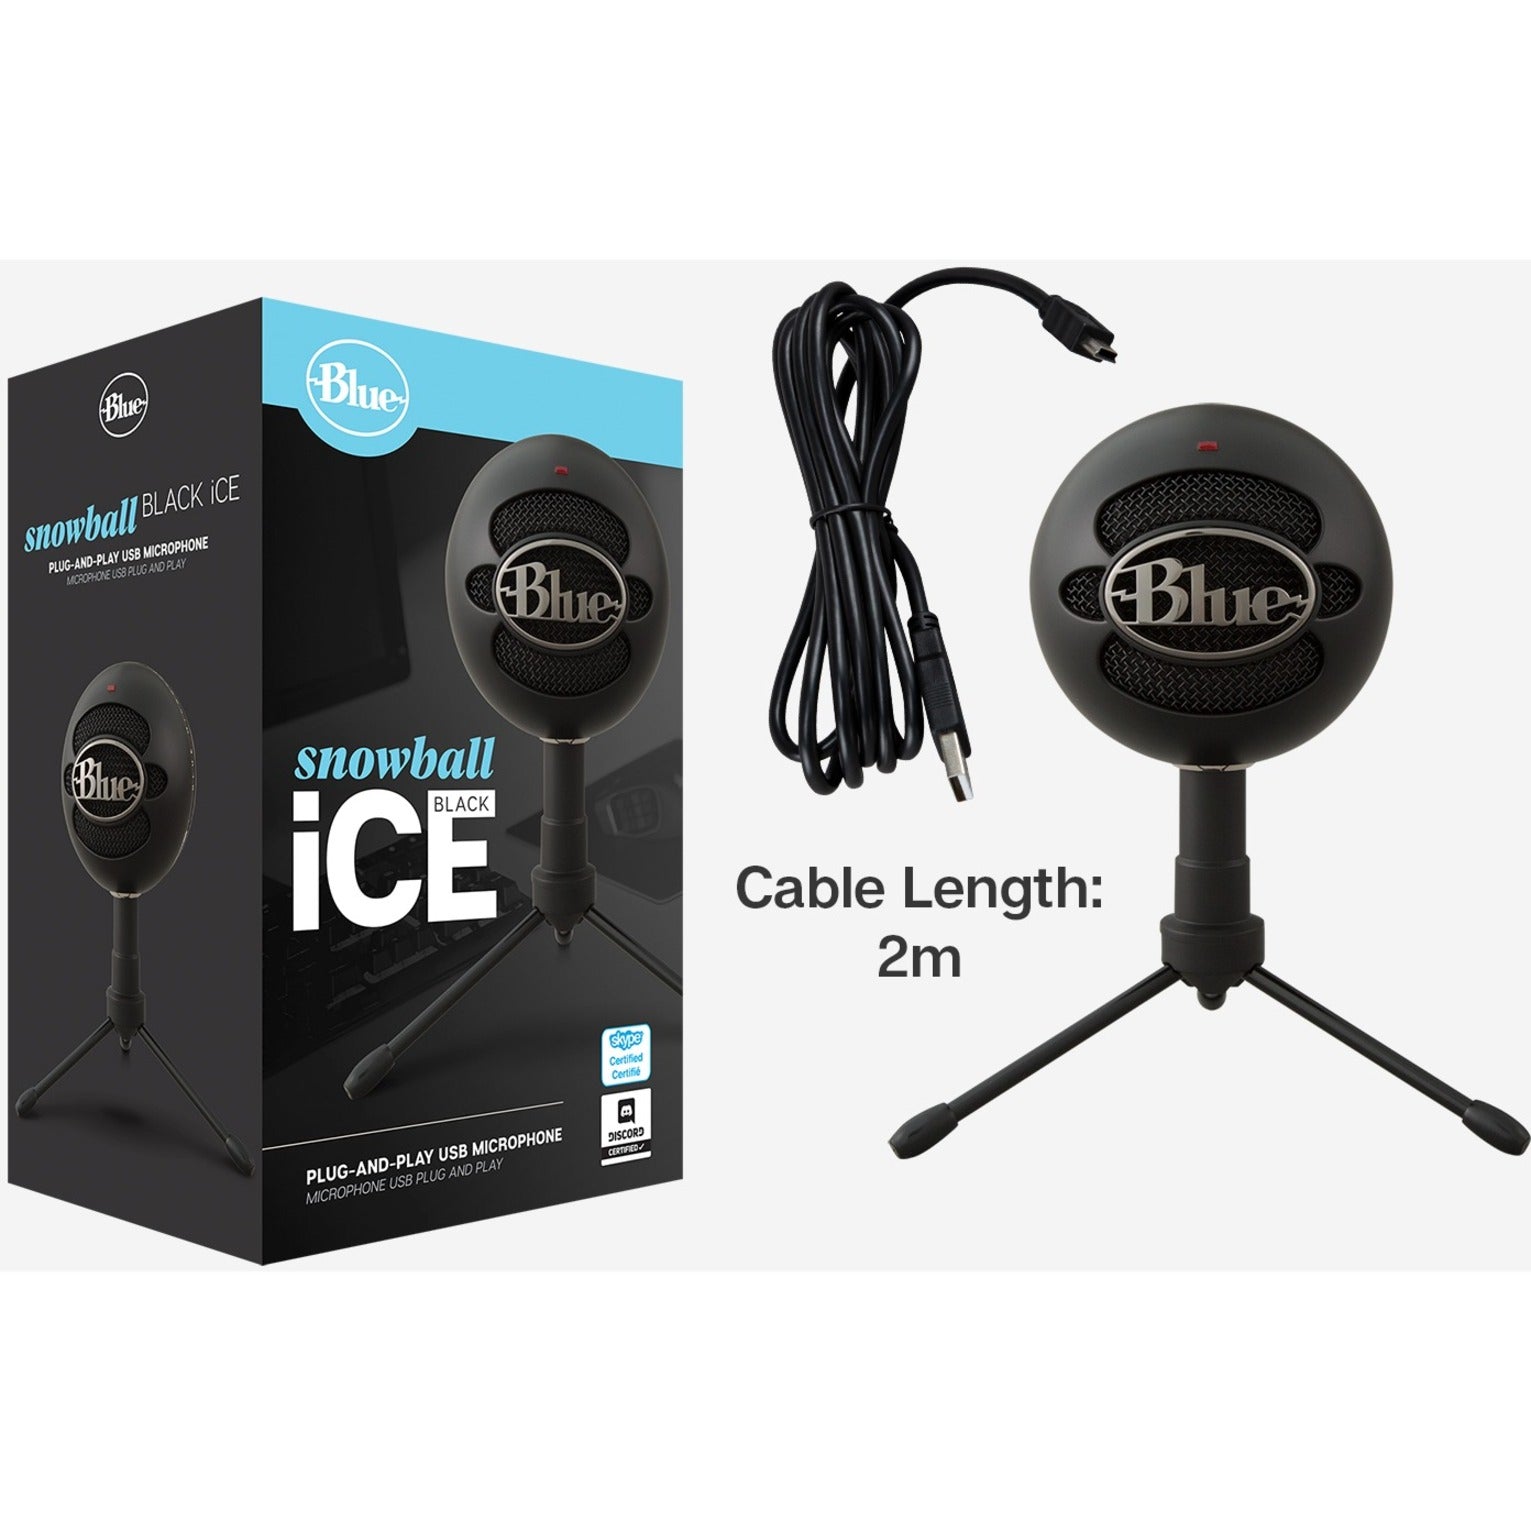 Blue 988-000067 Snowball iCE Plug and Play USB Microphone, Cardioid Condenser, Stand Mountable